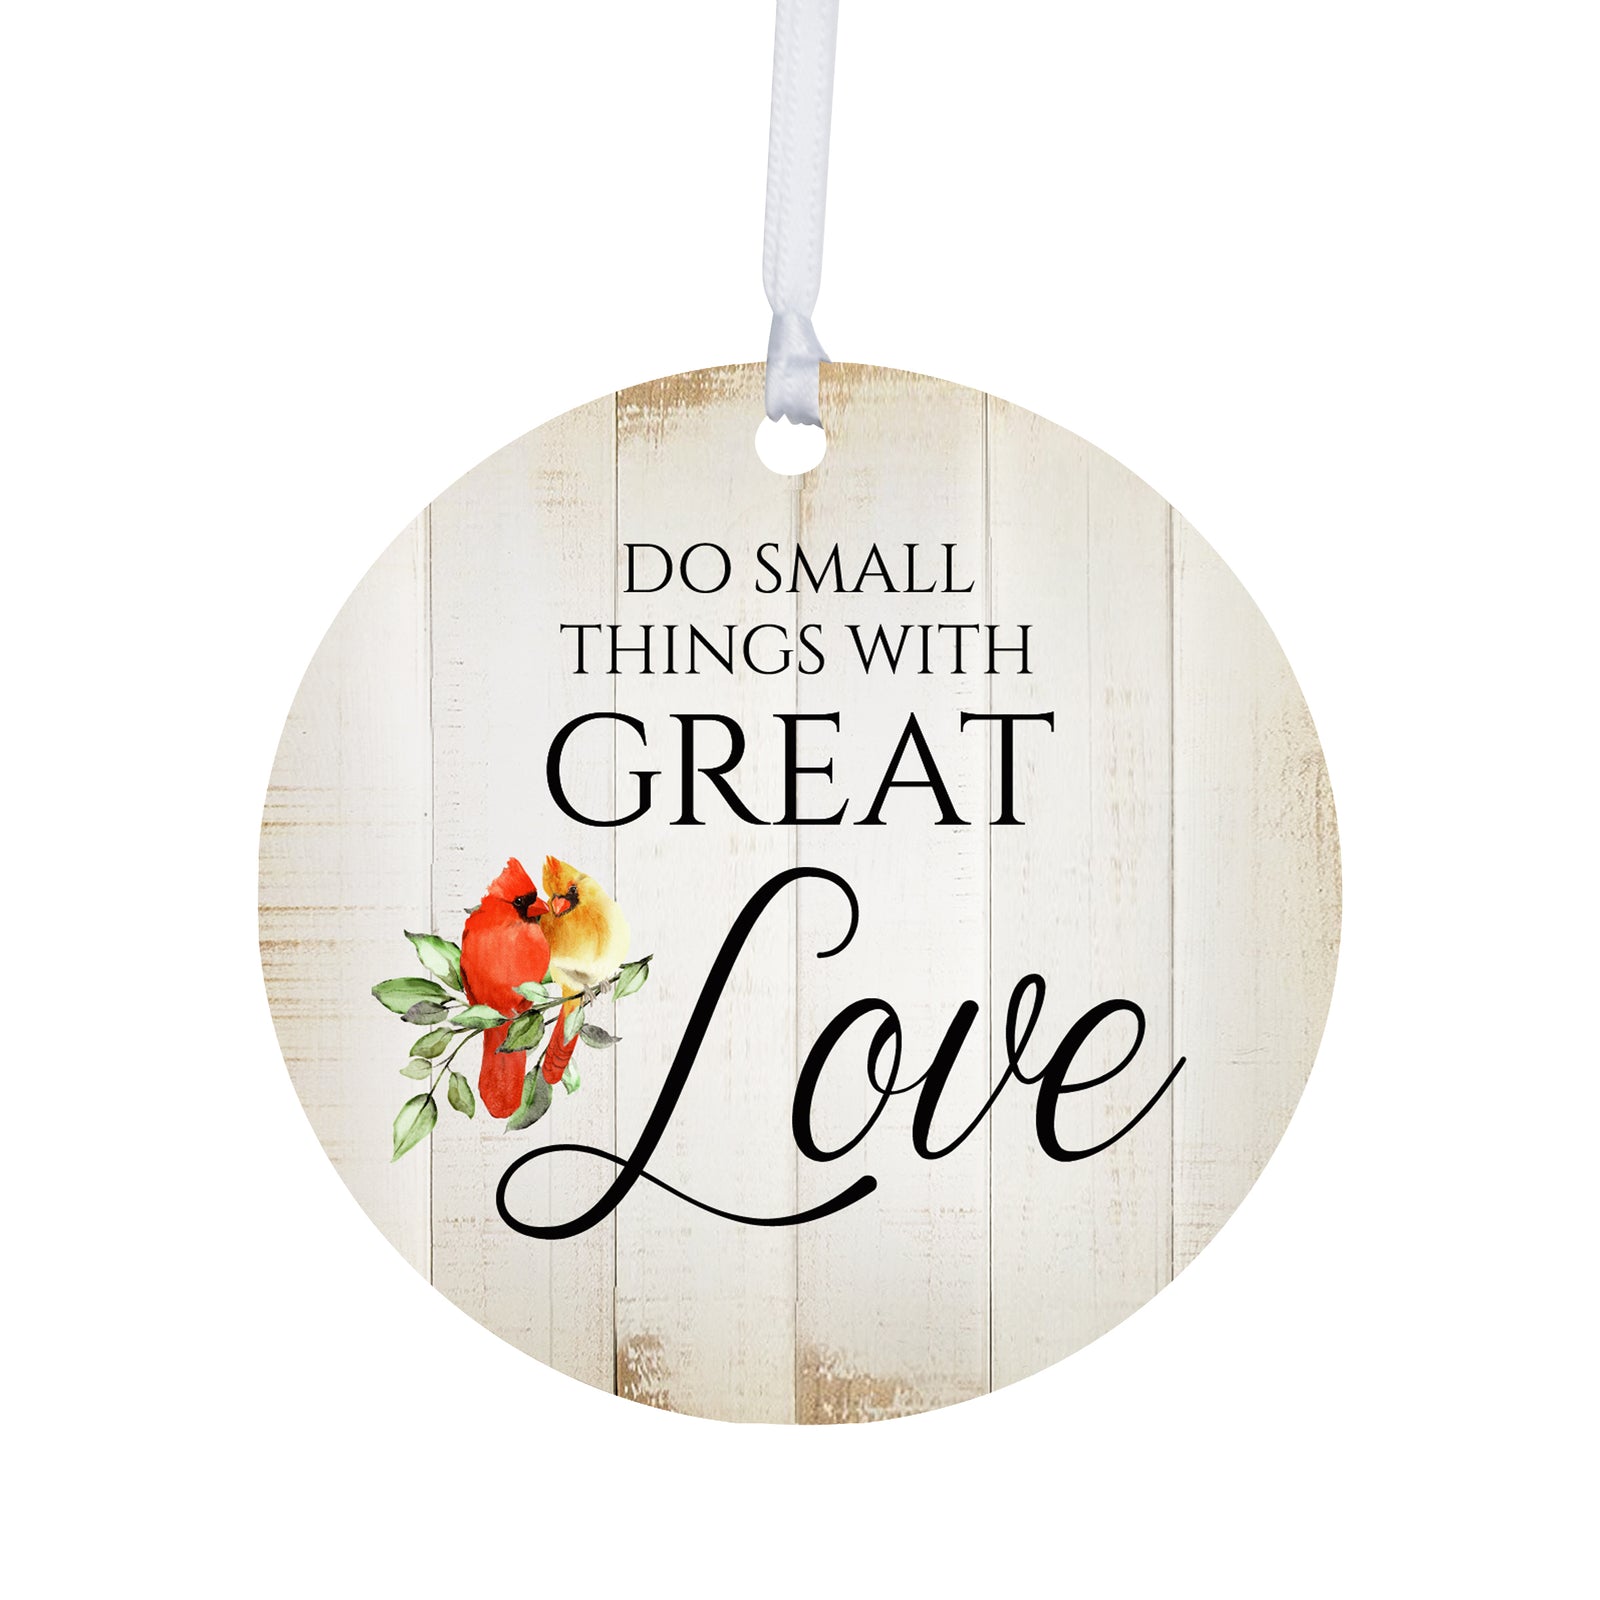 Vintage-Inspired Cardinal Ornament With Everyday Verses Gift Ideas - Do Small Things